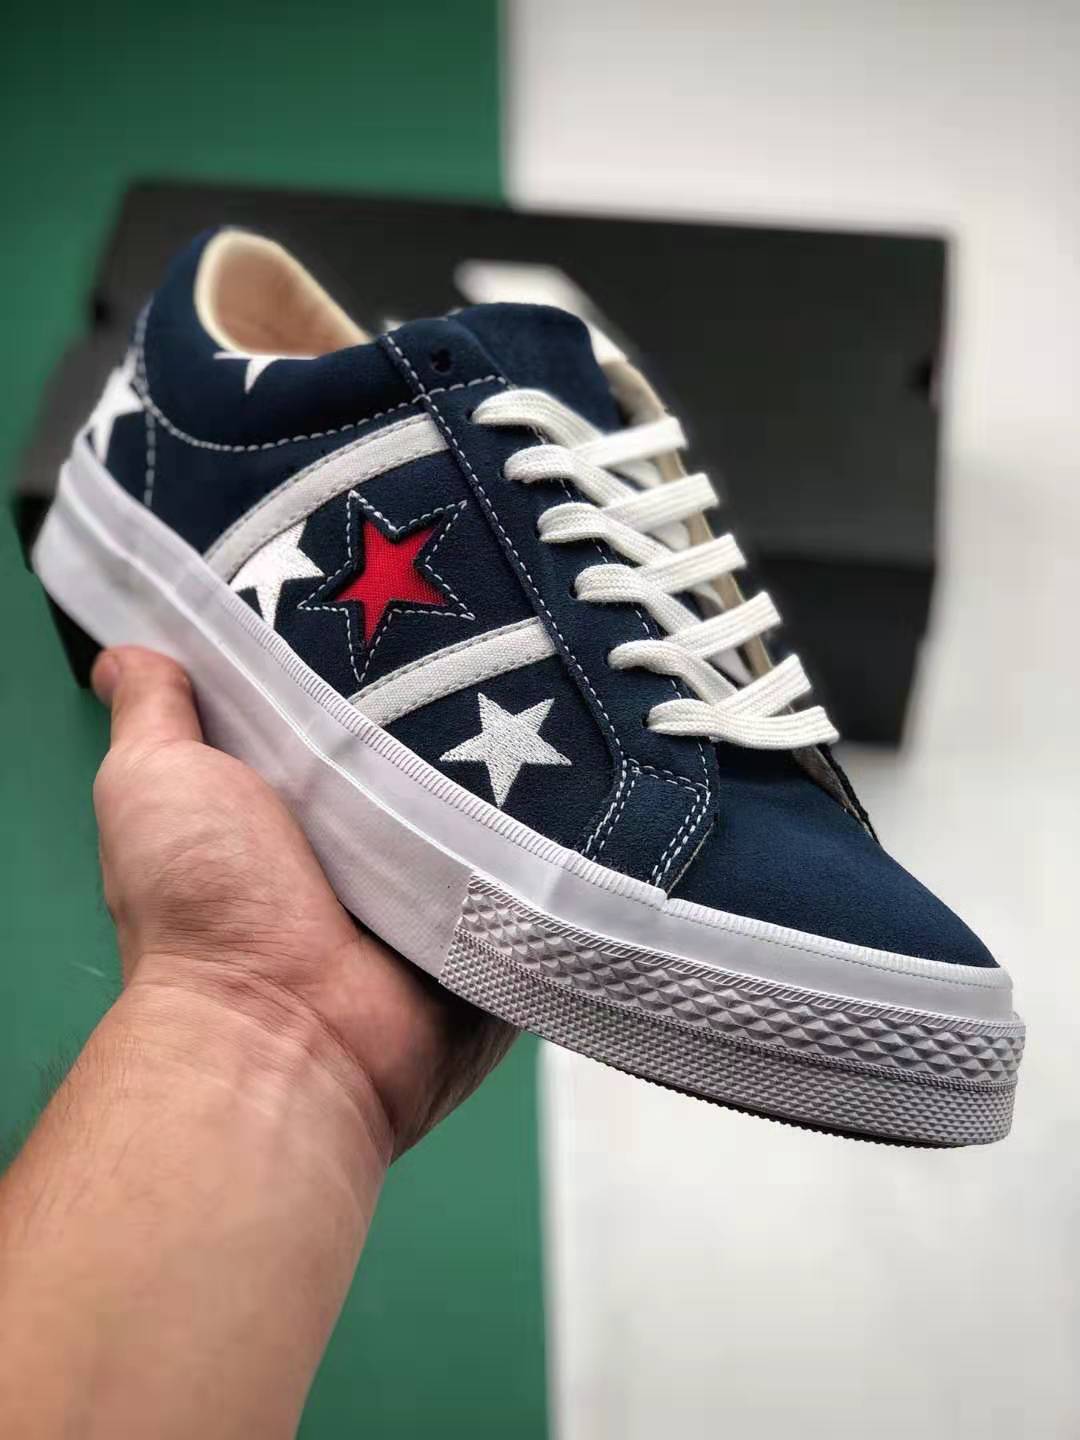 Converse One Star Academy Ox 'Navy' 165026C - Stylish and Versatile Footwear for All Occasions